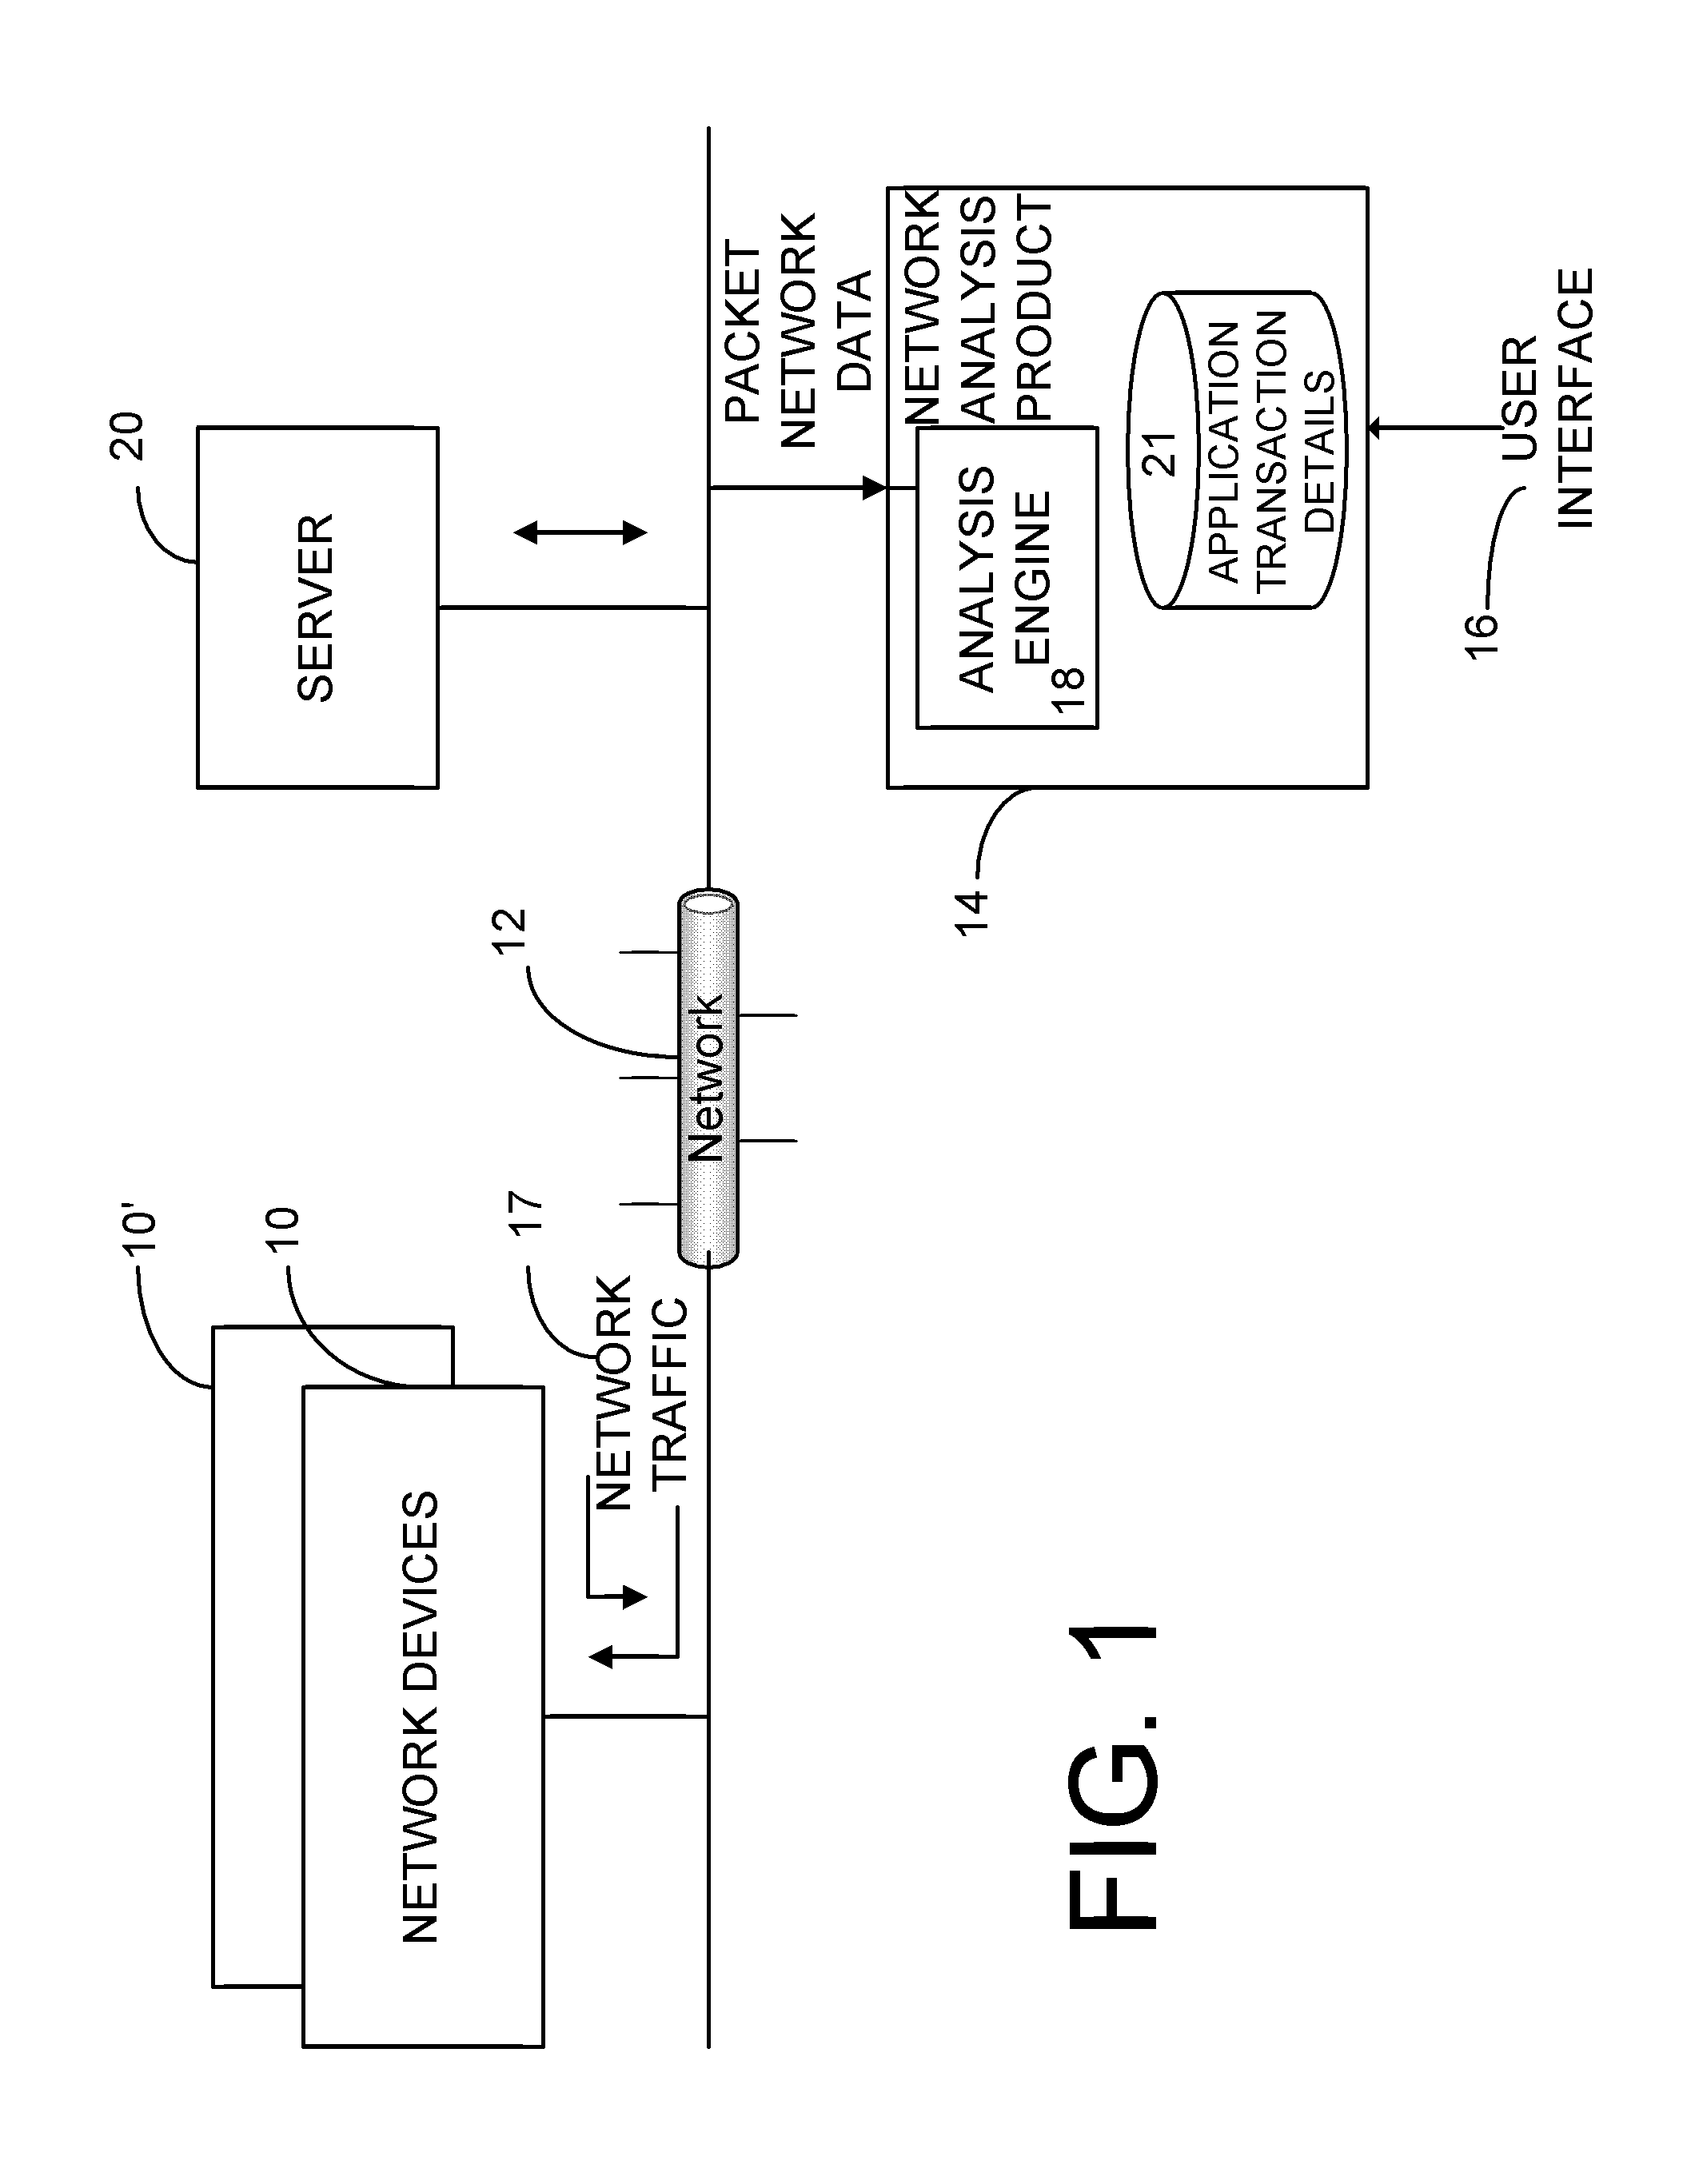 Method and apparatus for the discrimination and storage of application specific network protocol data from generic network protocol data